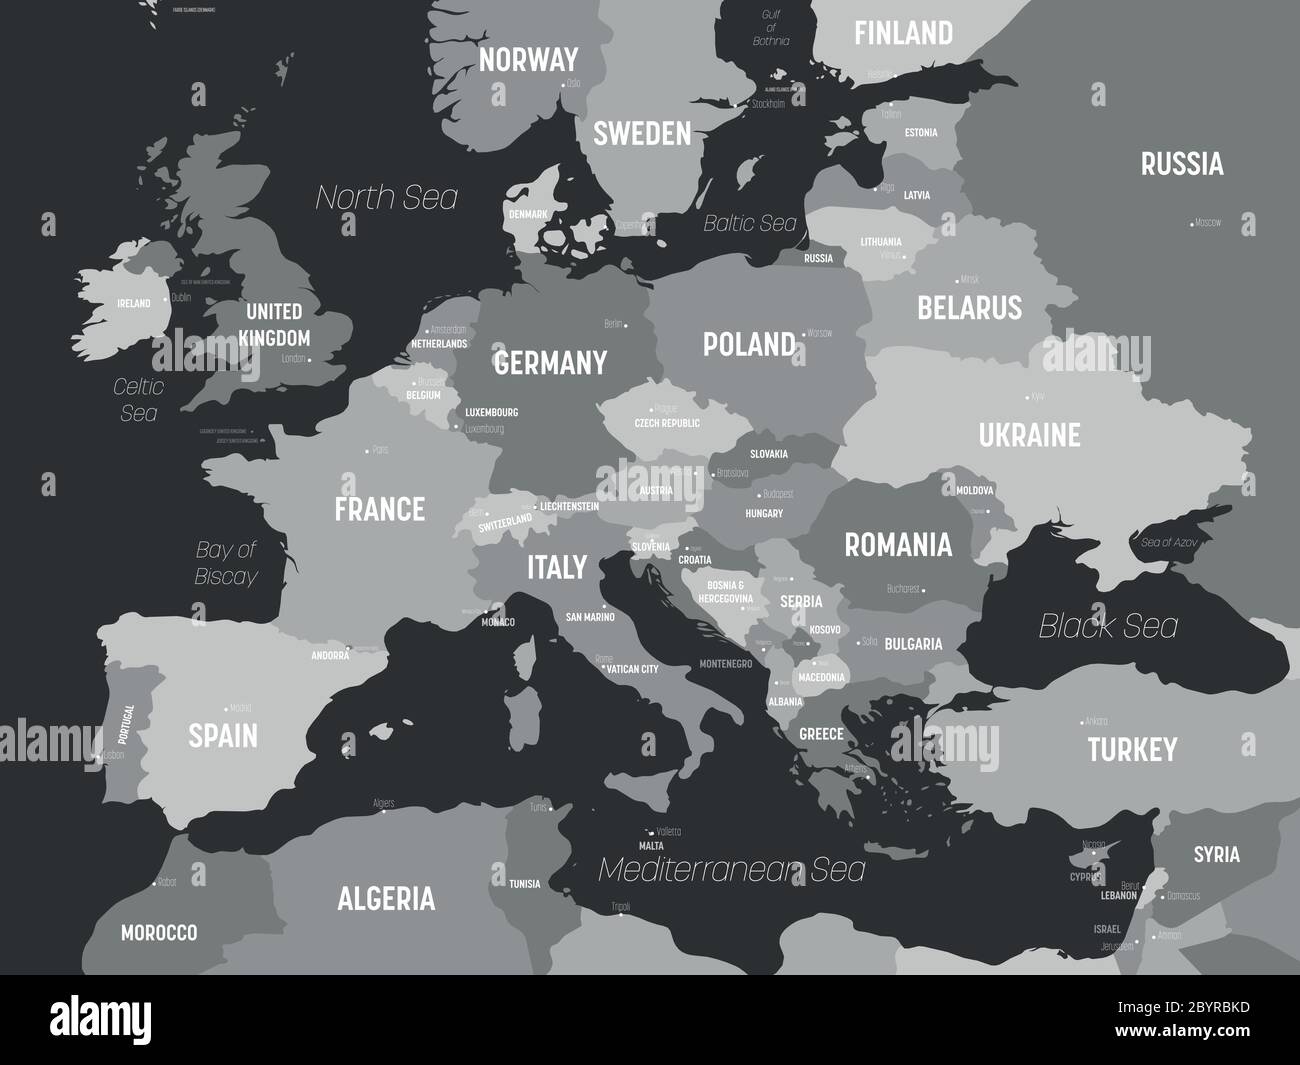 Europe map - grey colored on dark background. High detailed political map of european continent with country, capital, ocean and sea names labeling. Stock Vector